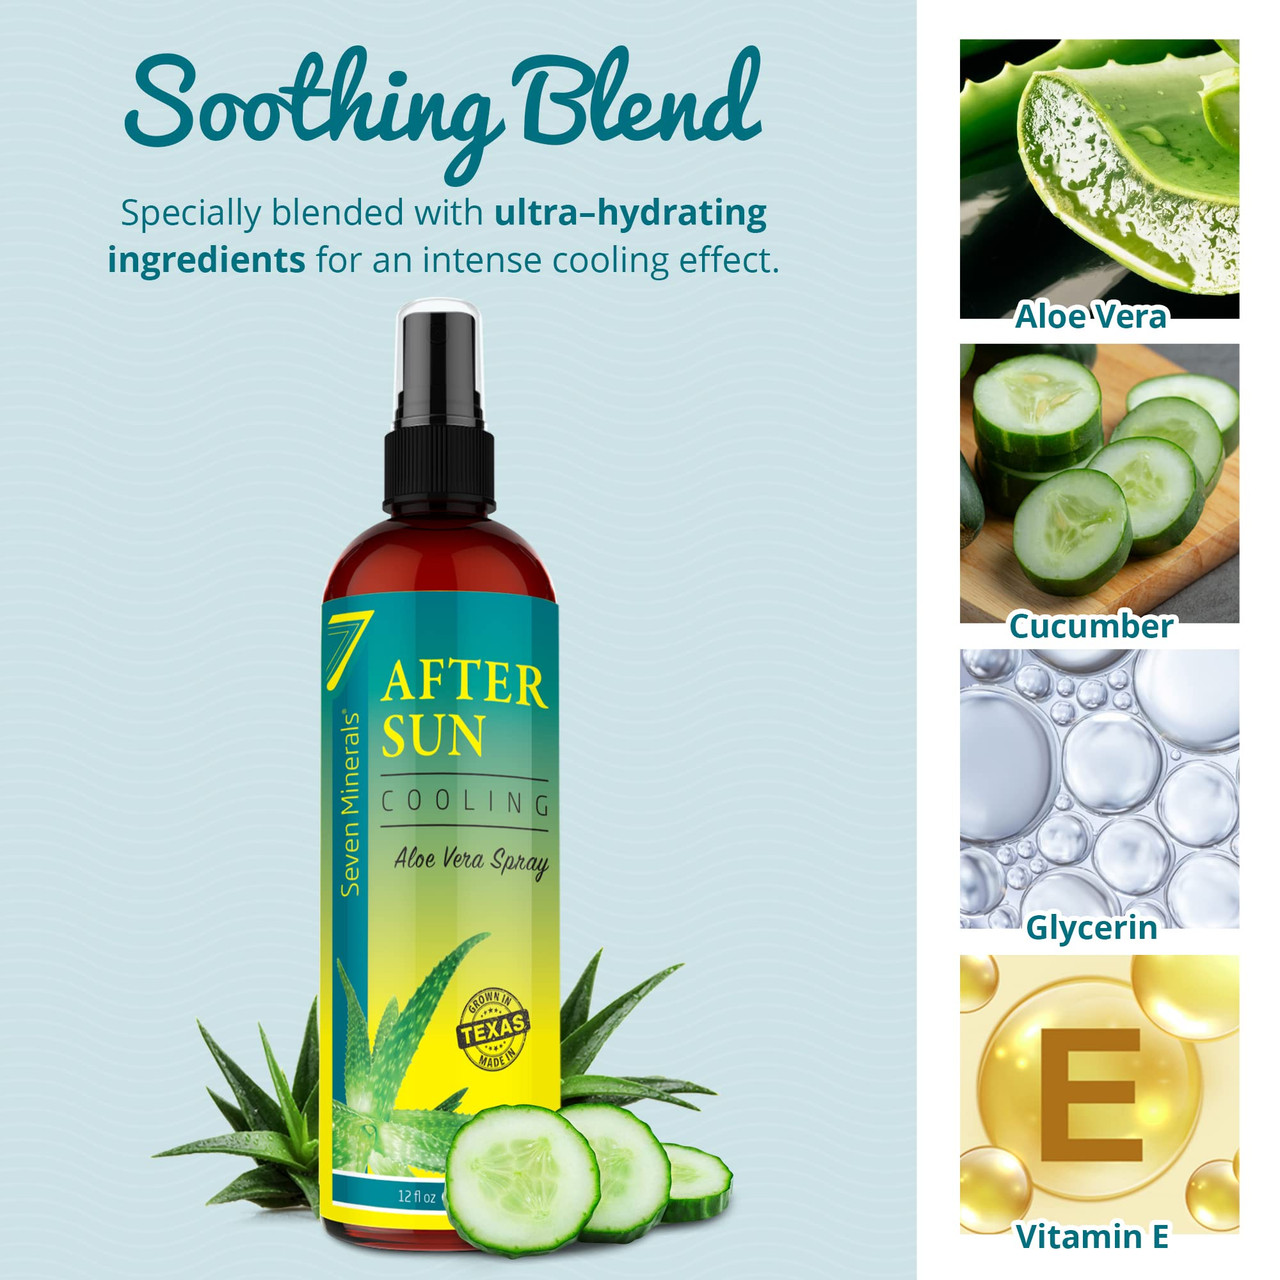 seven-minerals-cooling-after-sun-spray-with-aloe-vera-12-fl-oz-soothing-blend-of-aloe-vera-cucumber-glycerin-and-vitamin-e.jpg